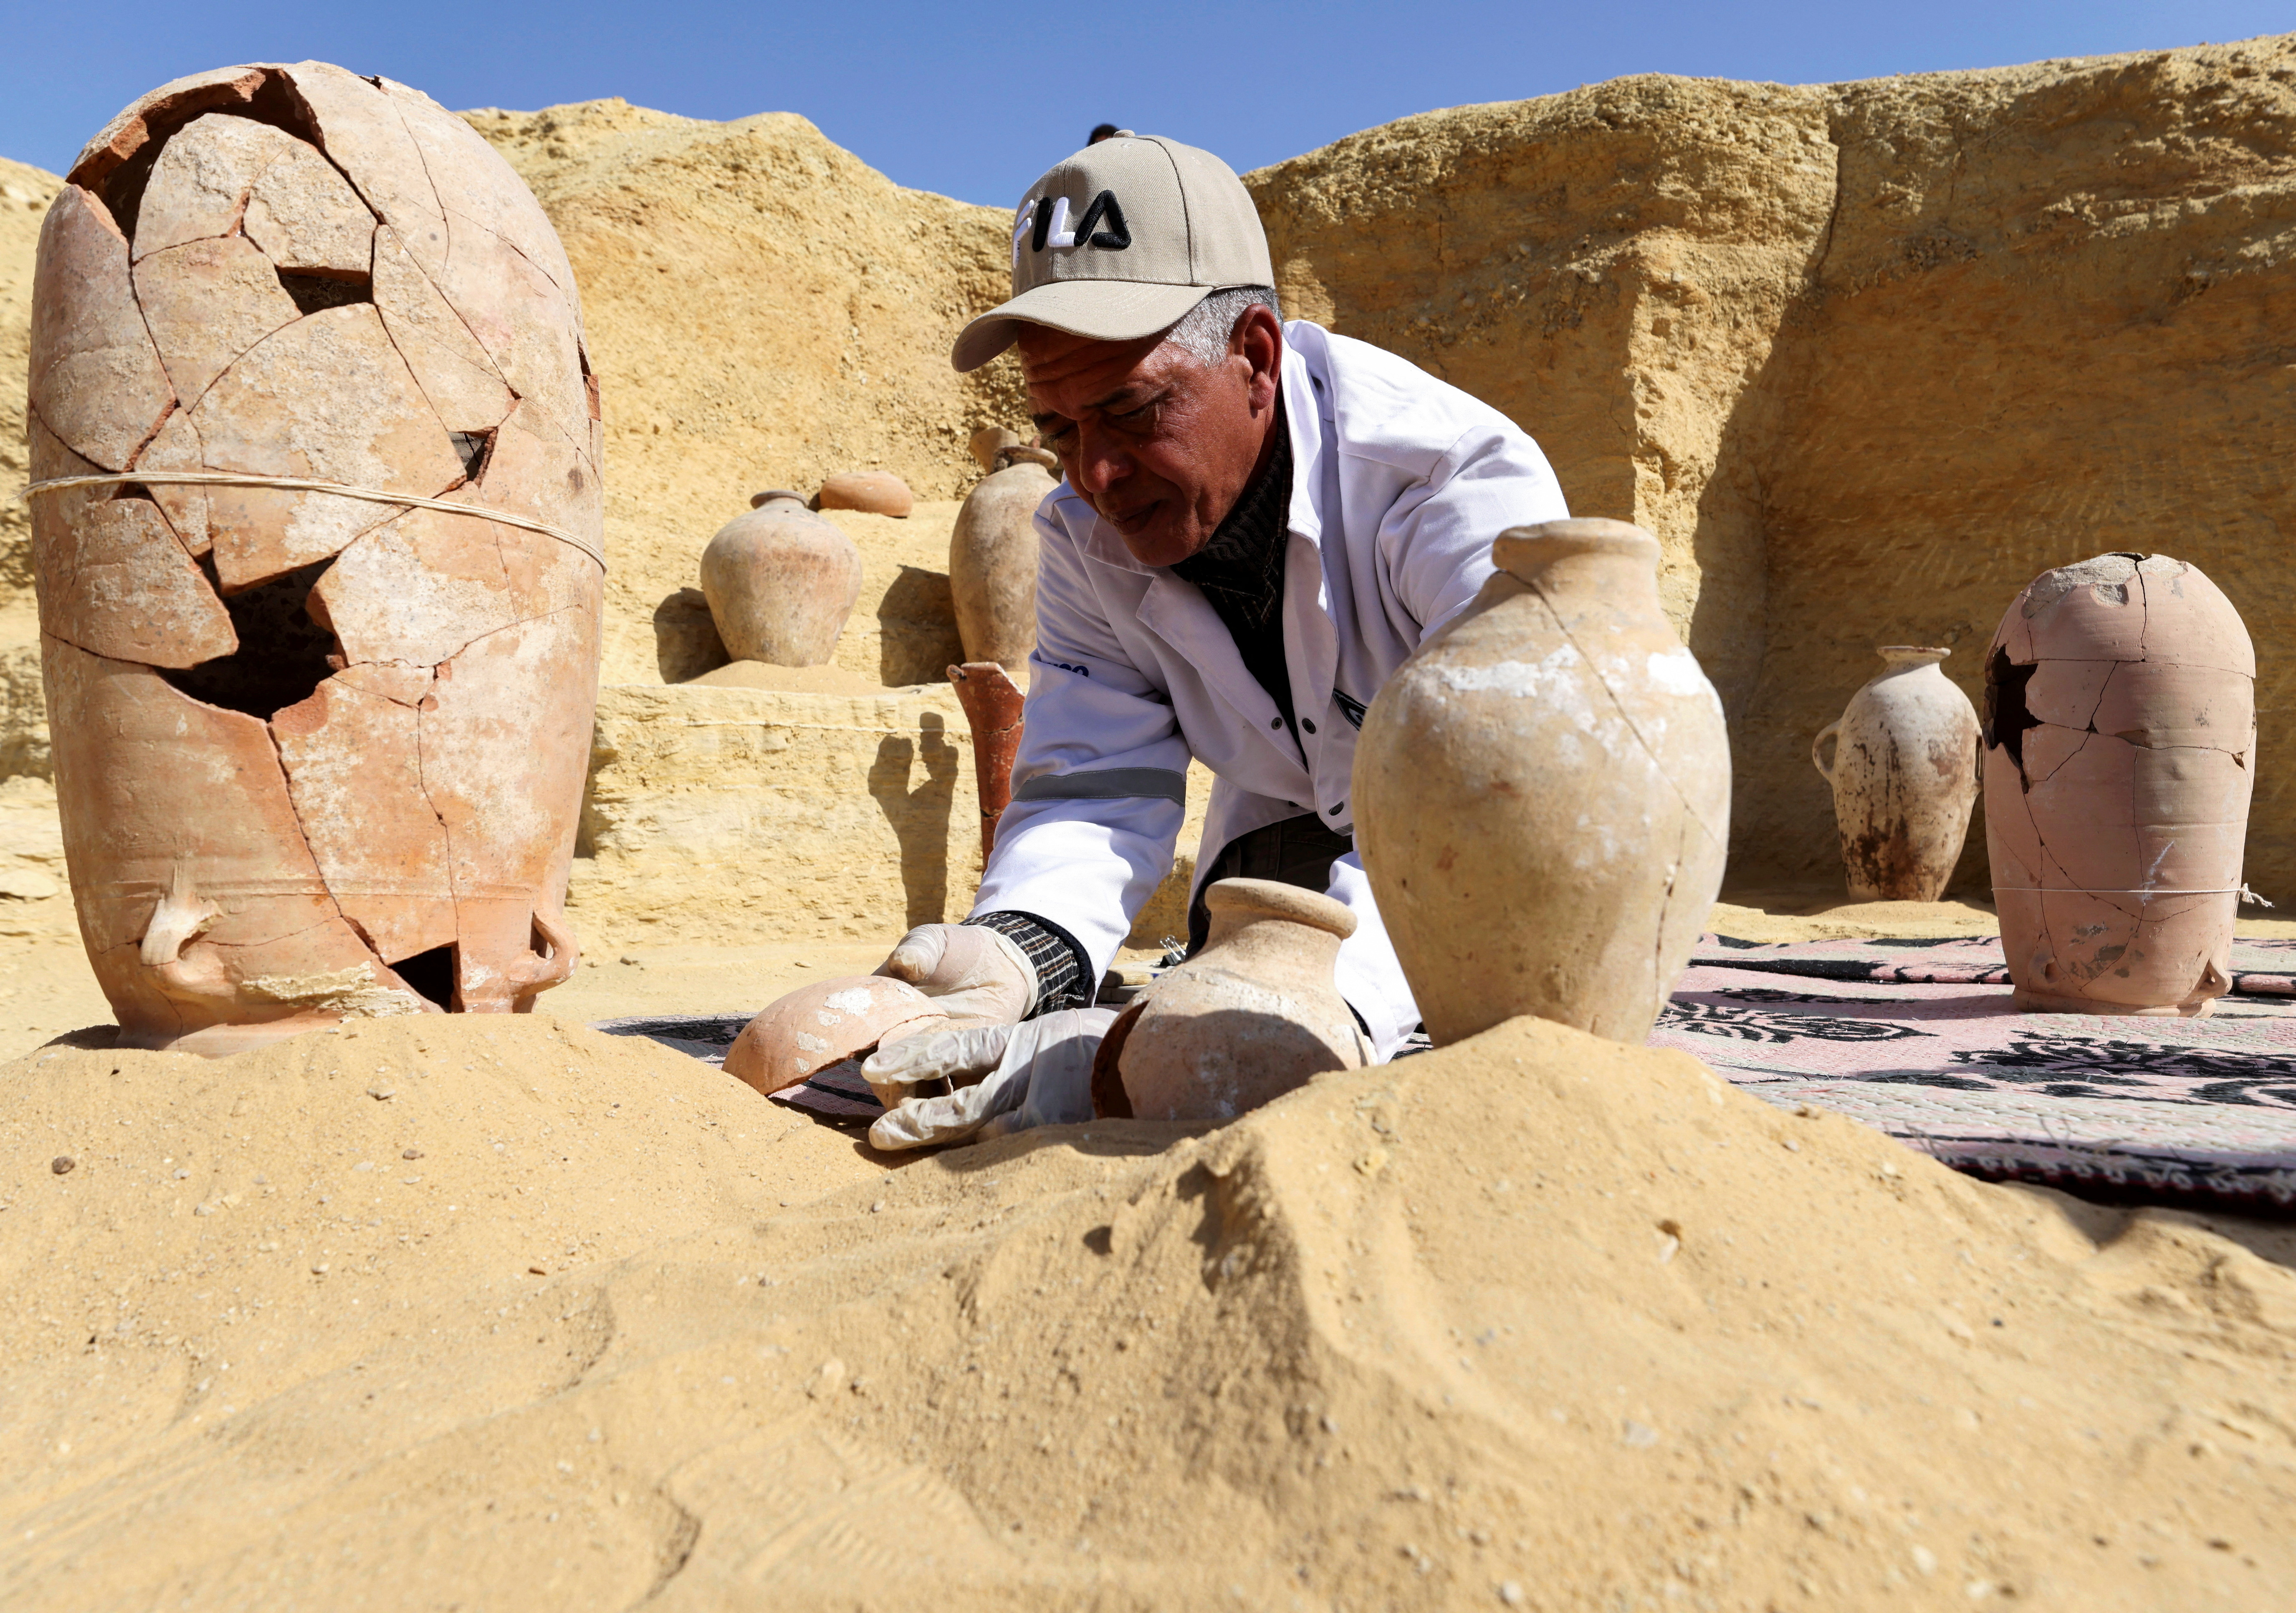 An Egyptian archaeologist restores antiquities after the announcement of the discovery of 4,300-year-old sealed tombs in Egypt's Saqqara necropolis, in Giza